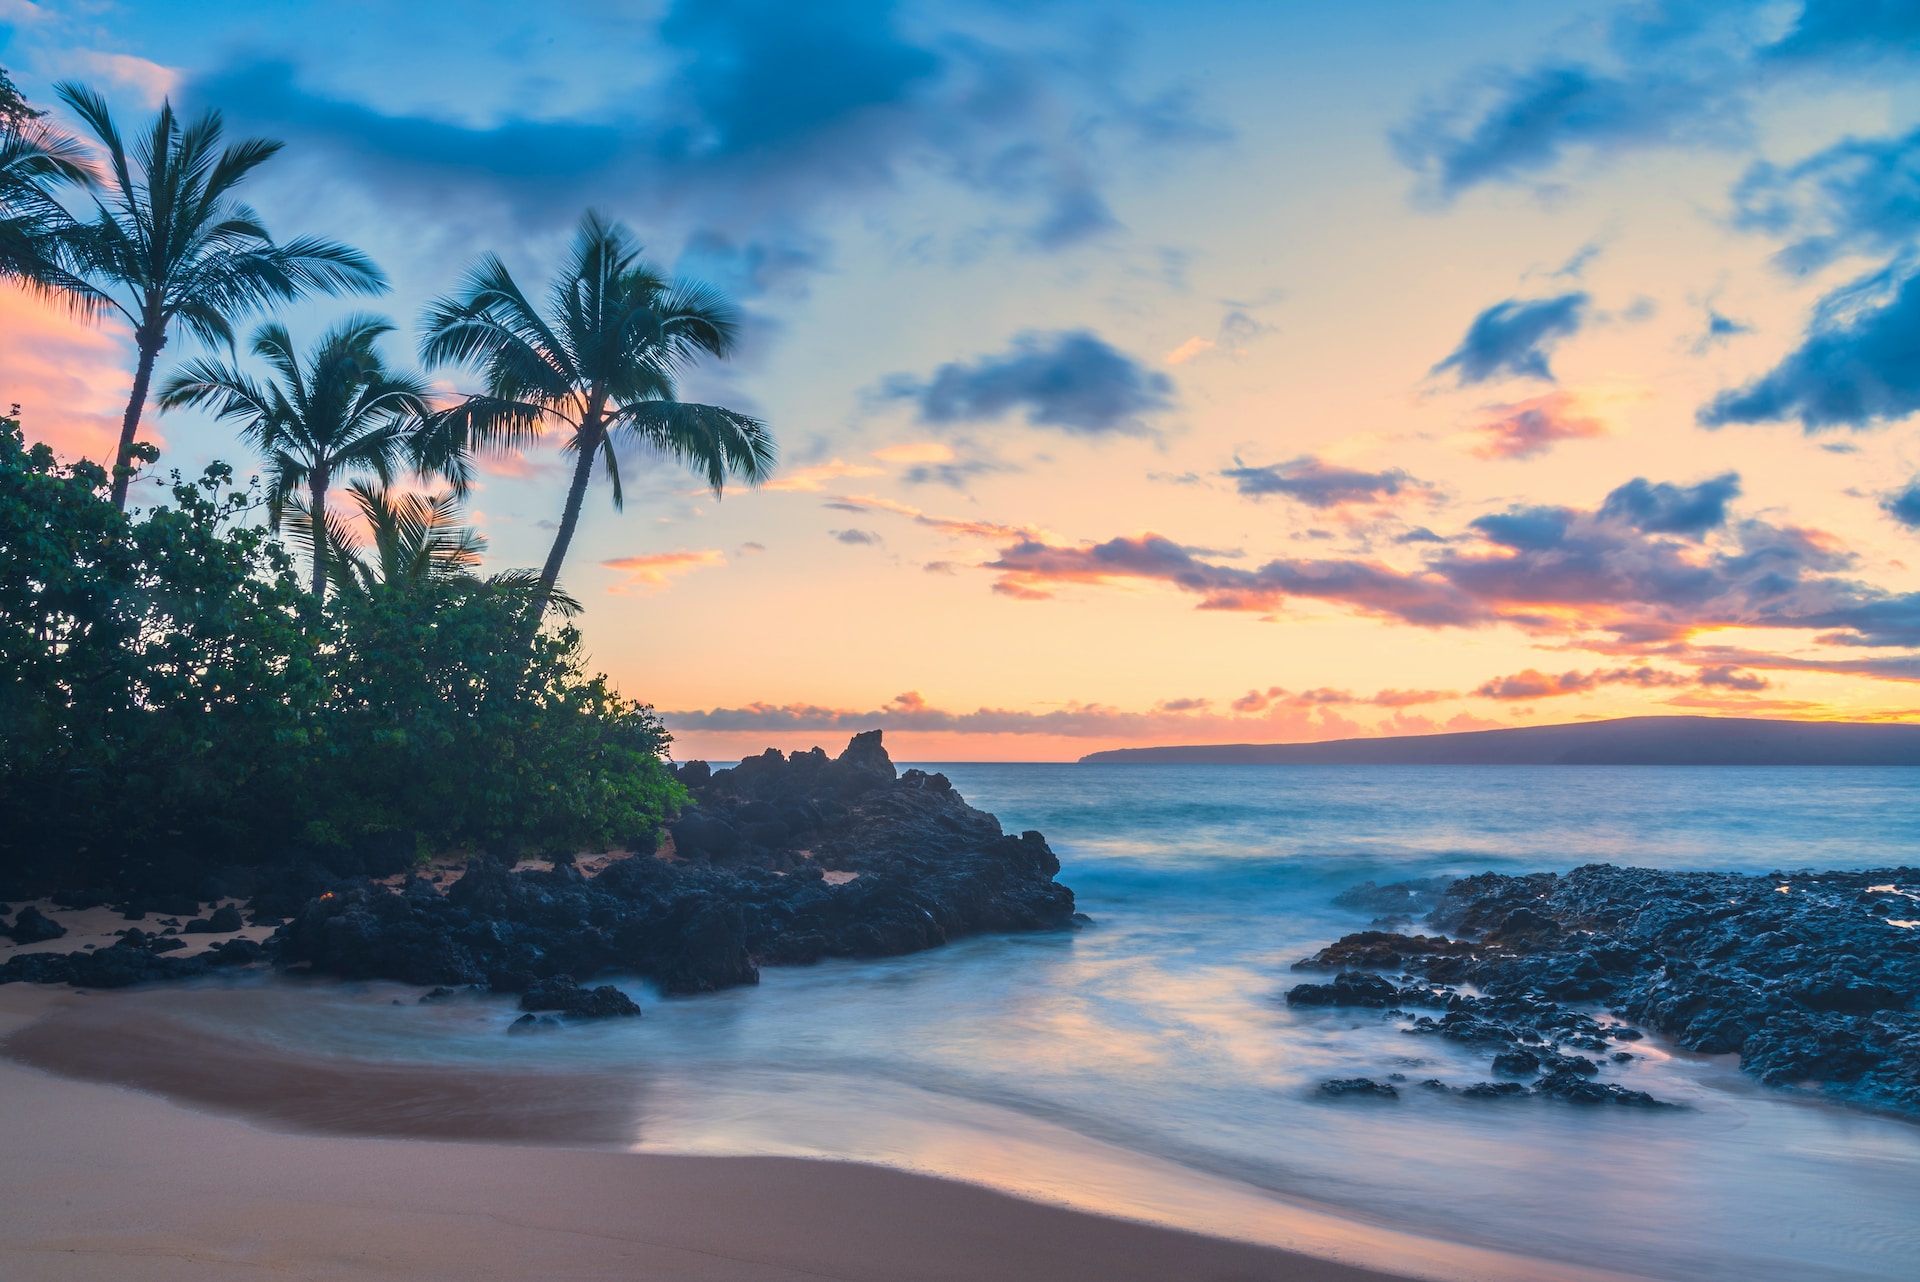 5 Instagram-Worthy Spots You Can Visit In Hawaii